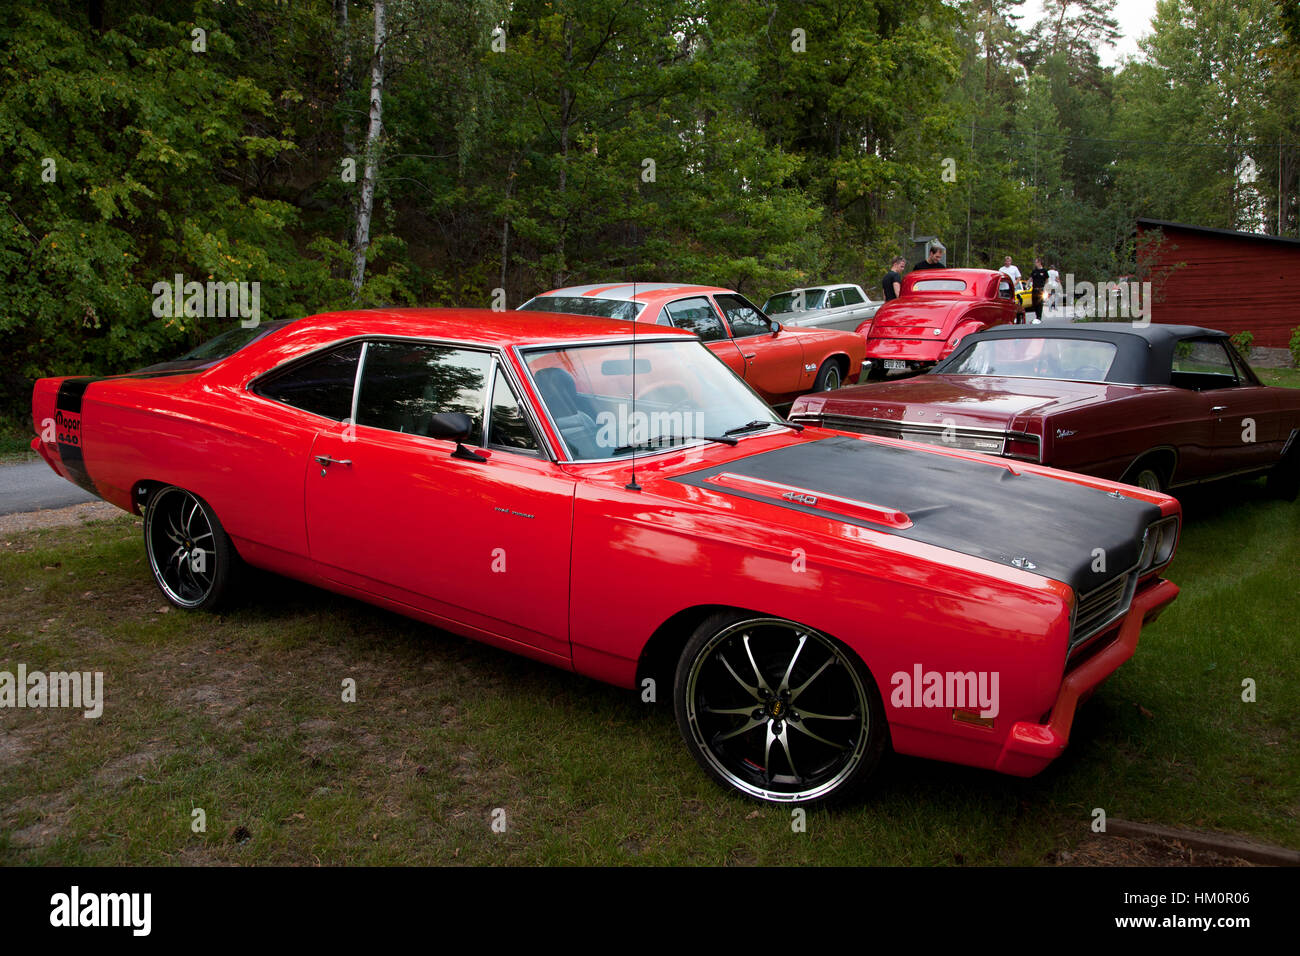 Car meet with American muscle cars in Sweden Stock Photo